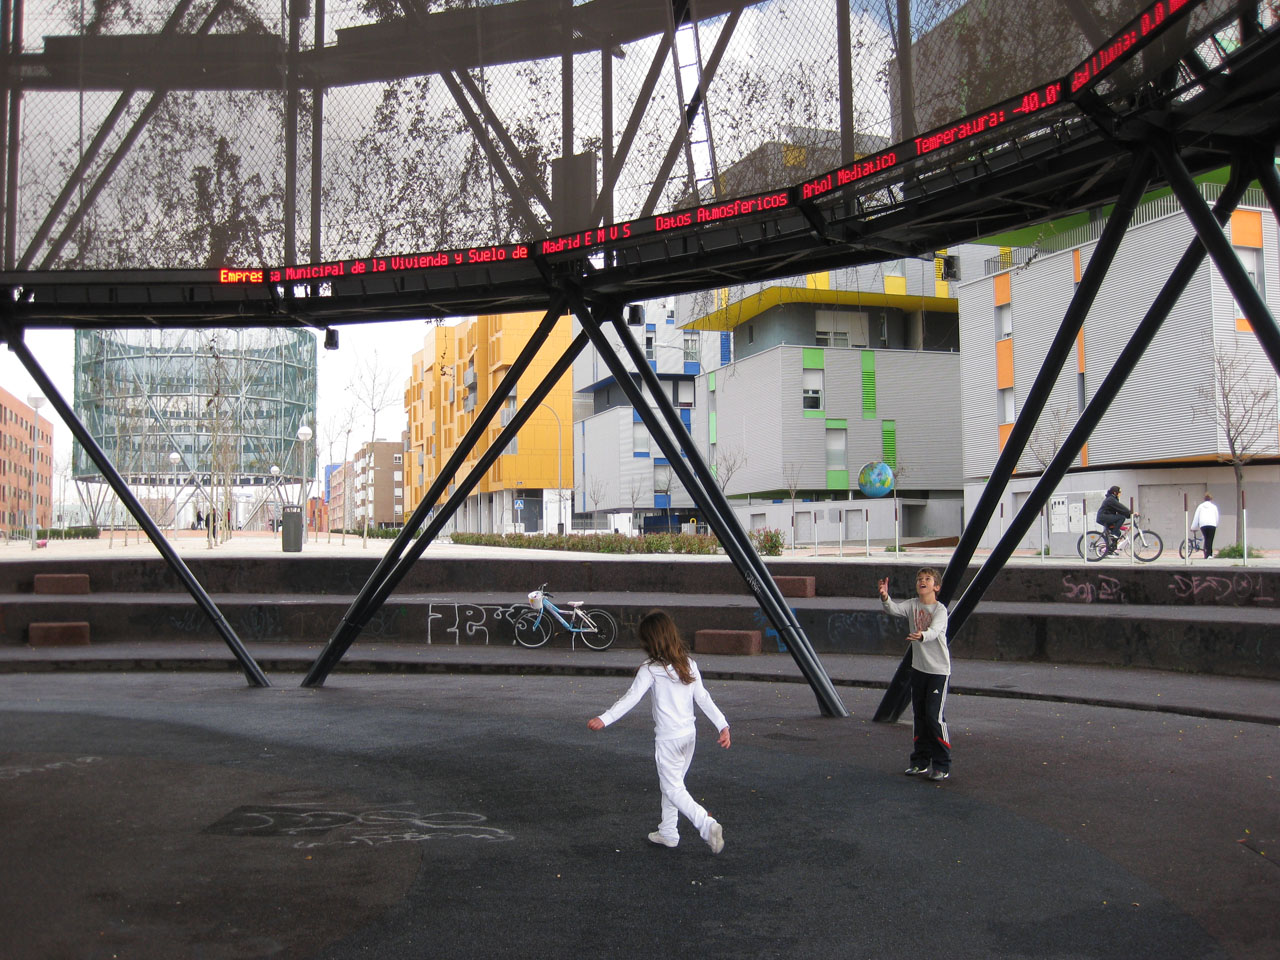 Children playing under Madrid's Eco-boulevard Air Trees by Ecosistema Urbano